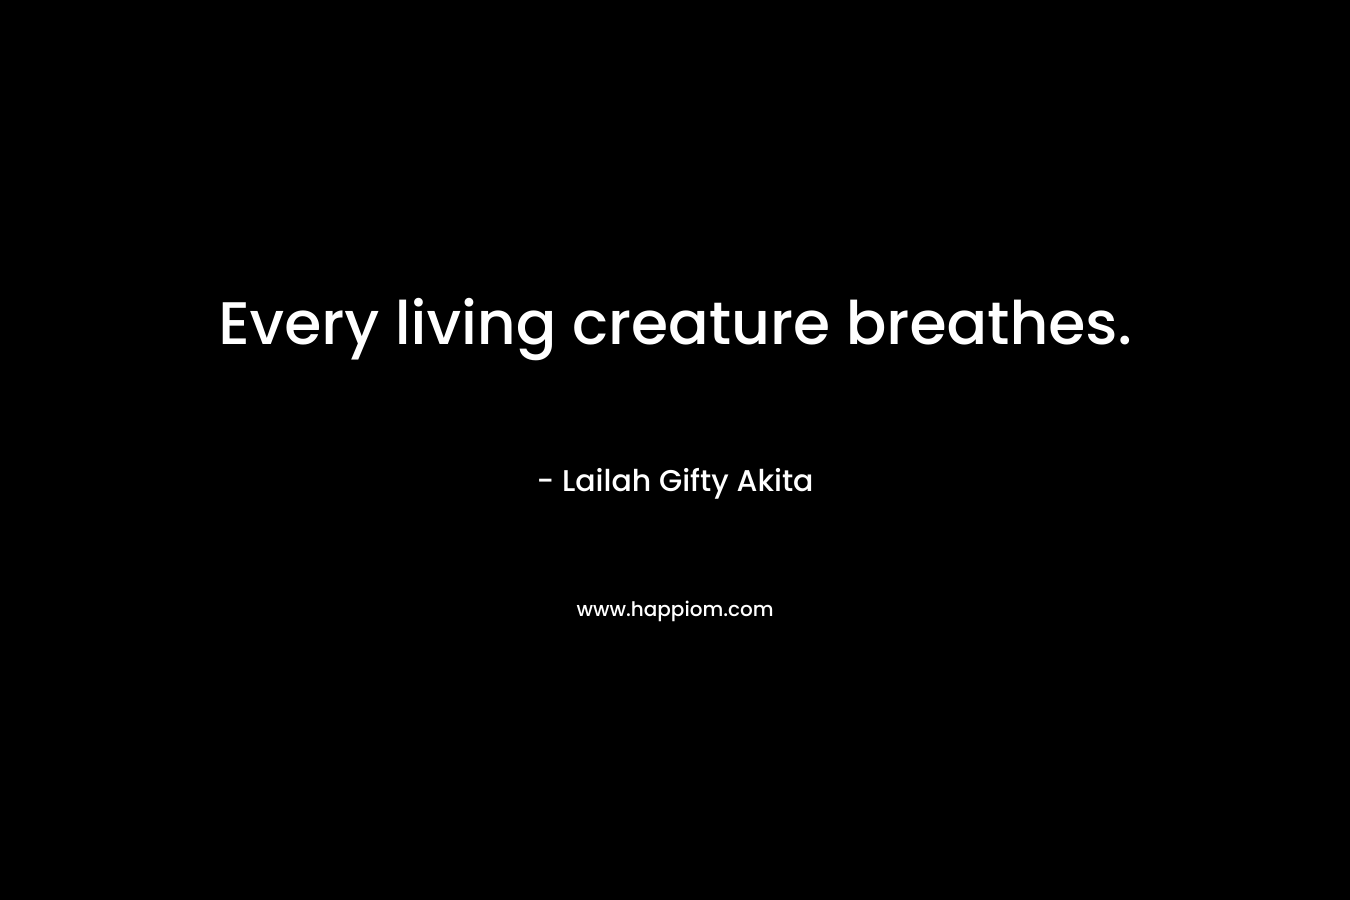 Every living creature breathes.